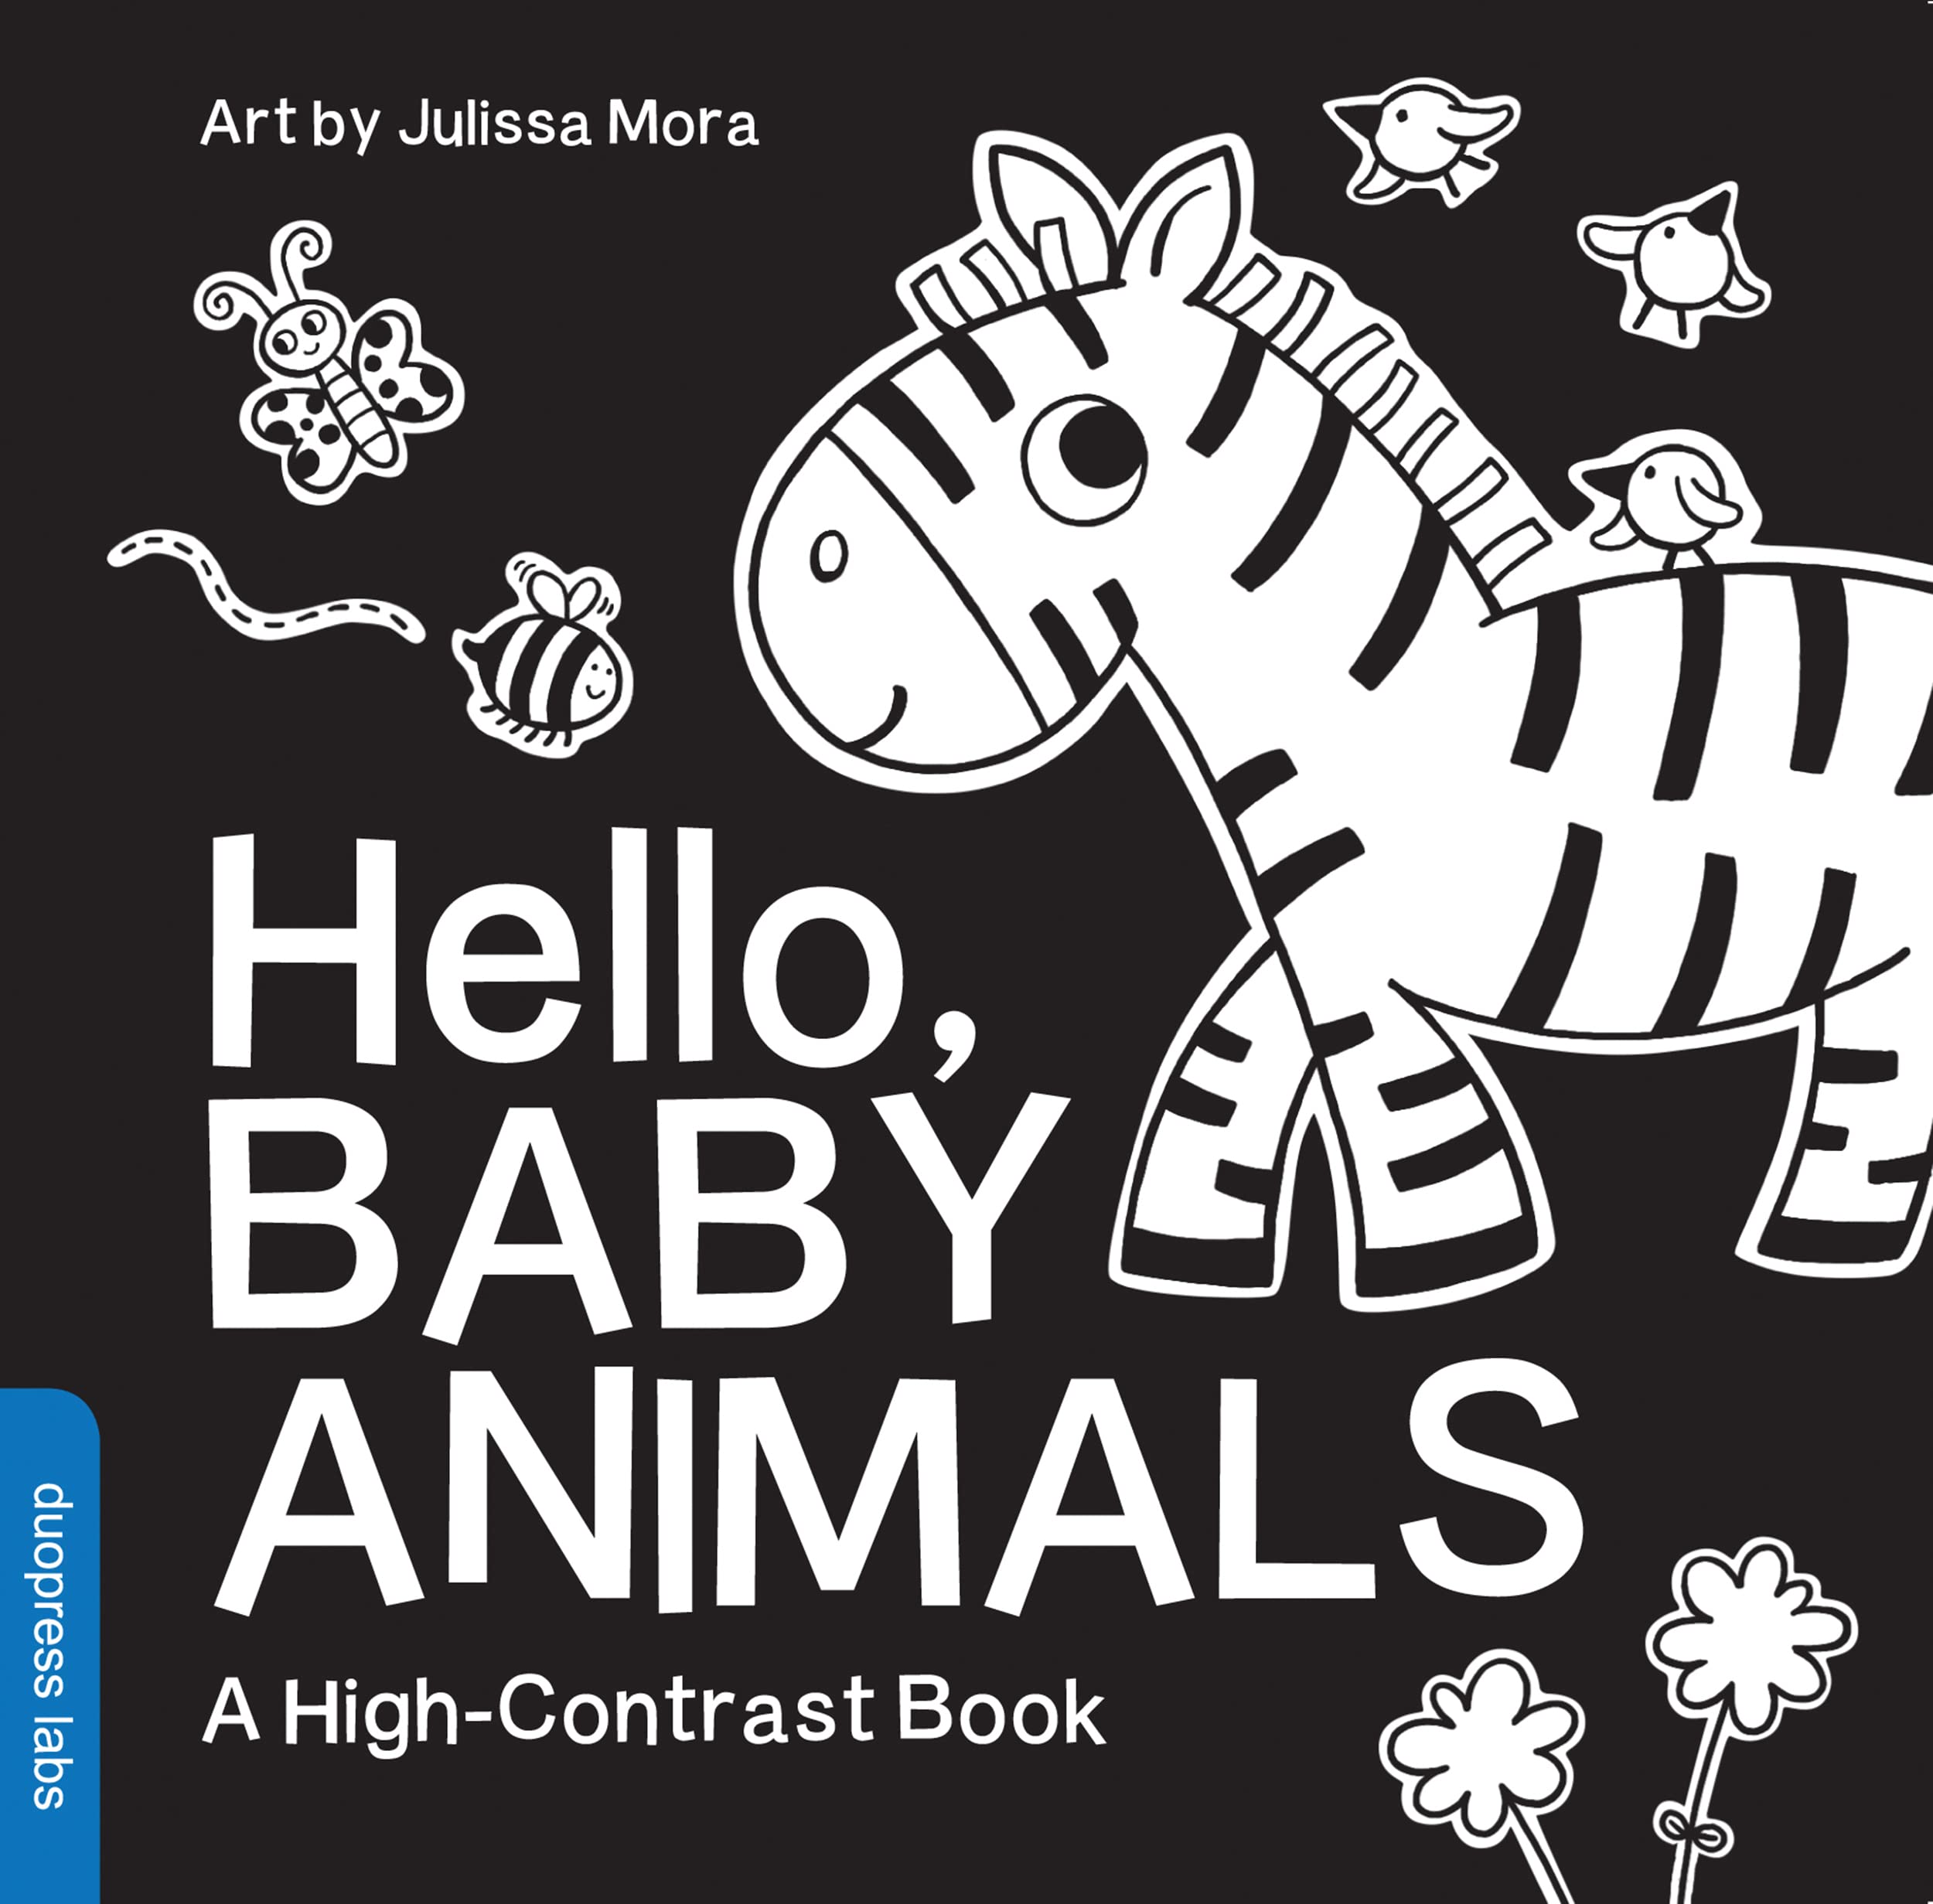 Hello, Baby Animals: A Durable High-Contrast Black-and-White Board Book for Newborns and Babies (High-Contrast Books) $4.73